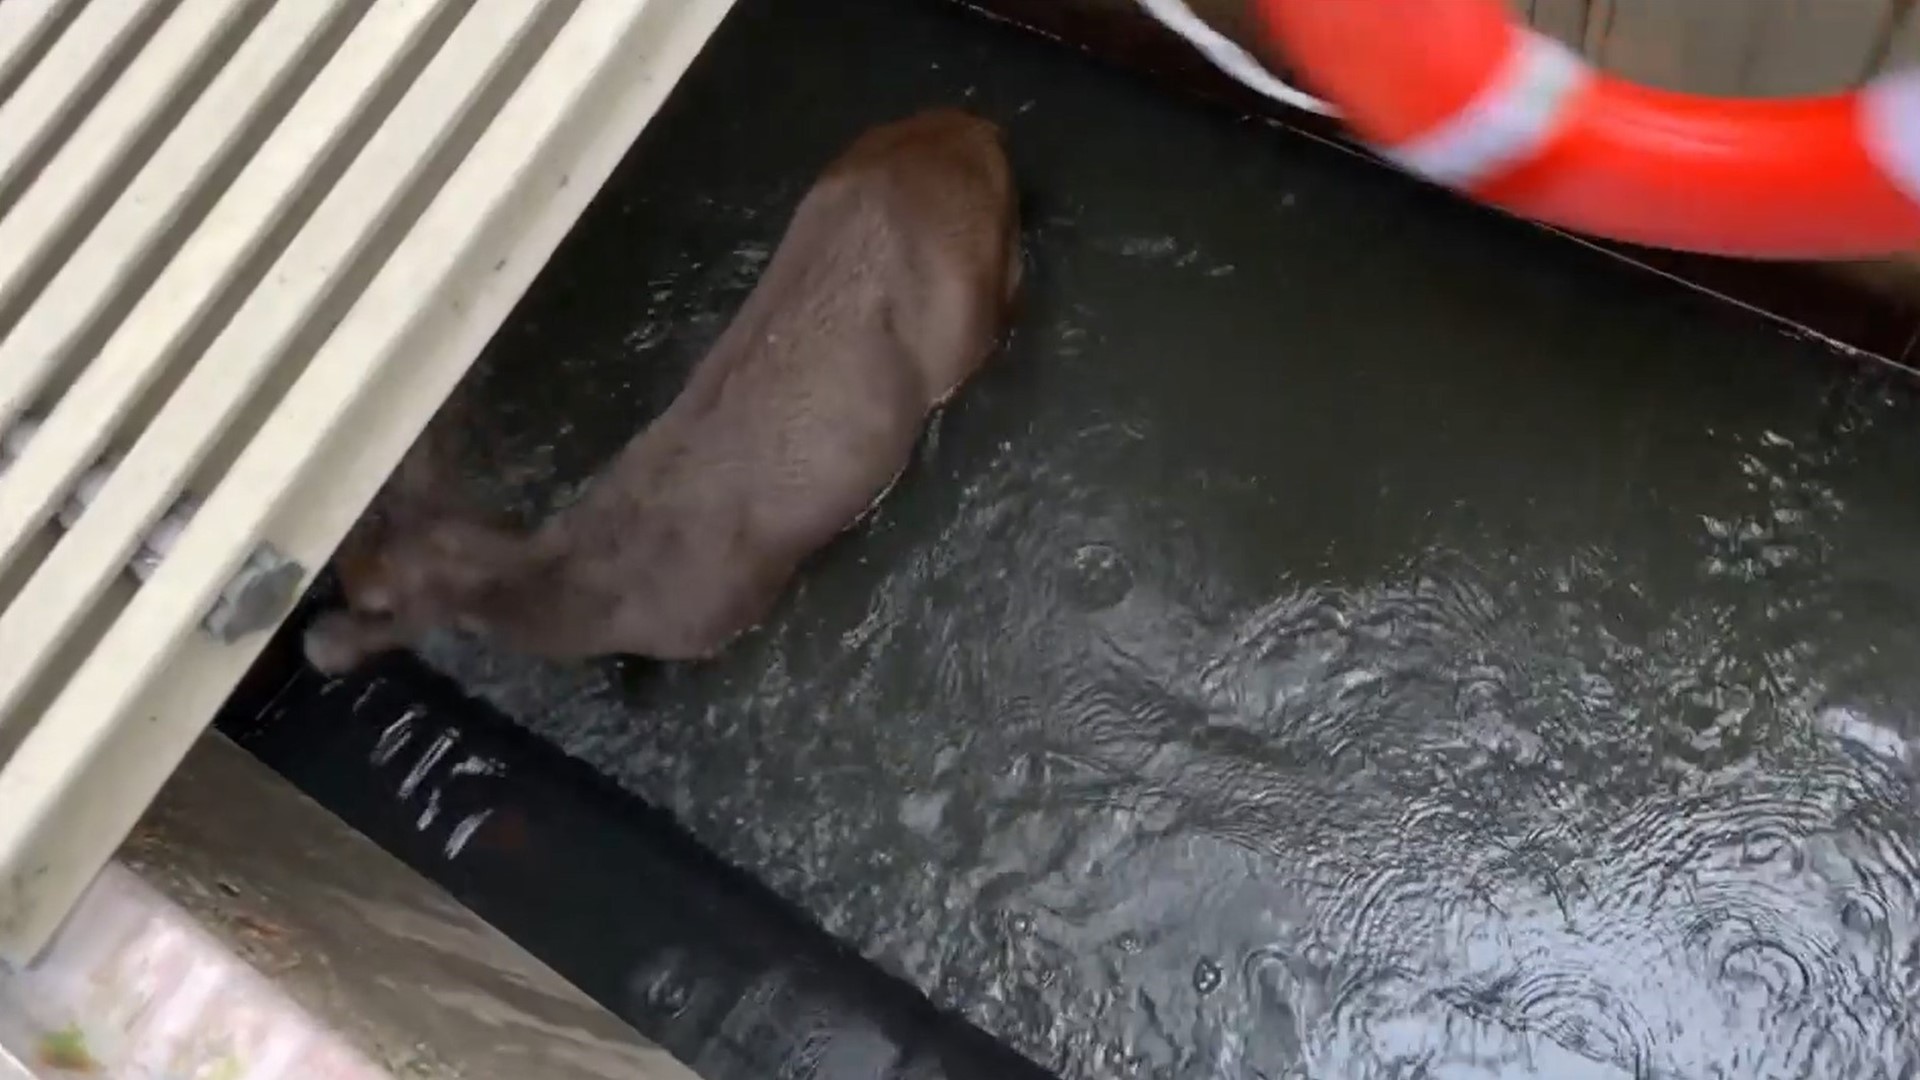 Firefighters rescued a deer trapped in a tank at a St. Helens, Oregon, water treatment plant. Video courtesy of Columbia River Fire & Rescue.